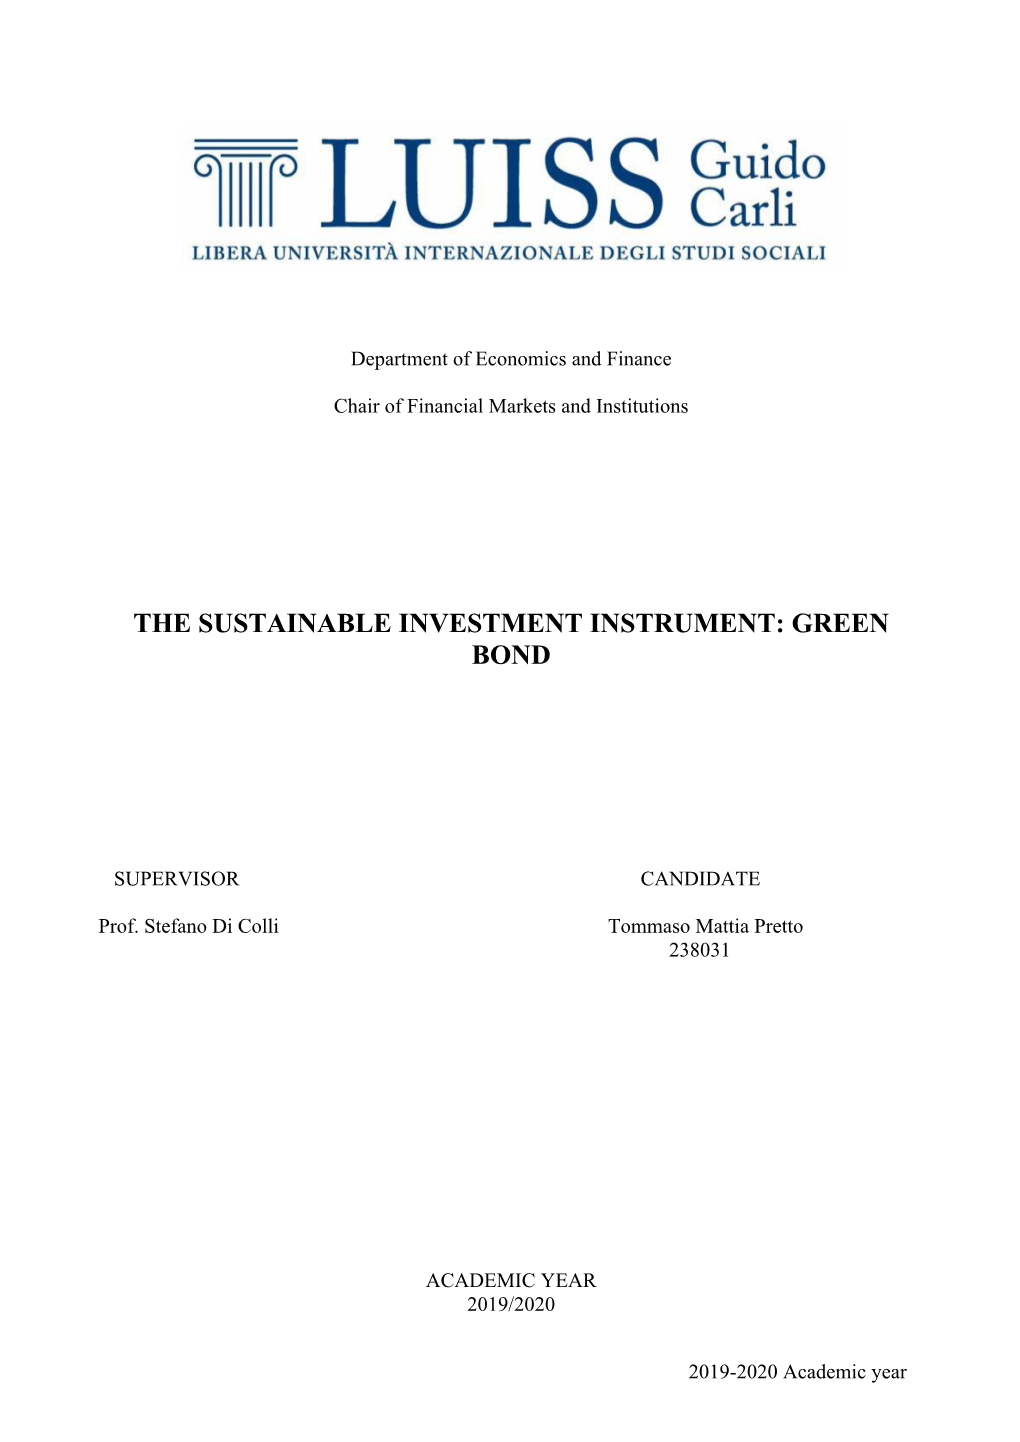 The Sustainable Investment Instrument: Green Bond